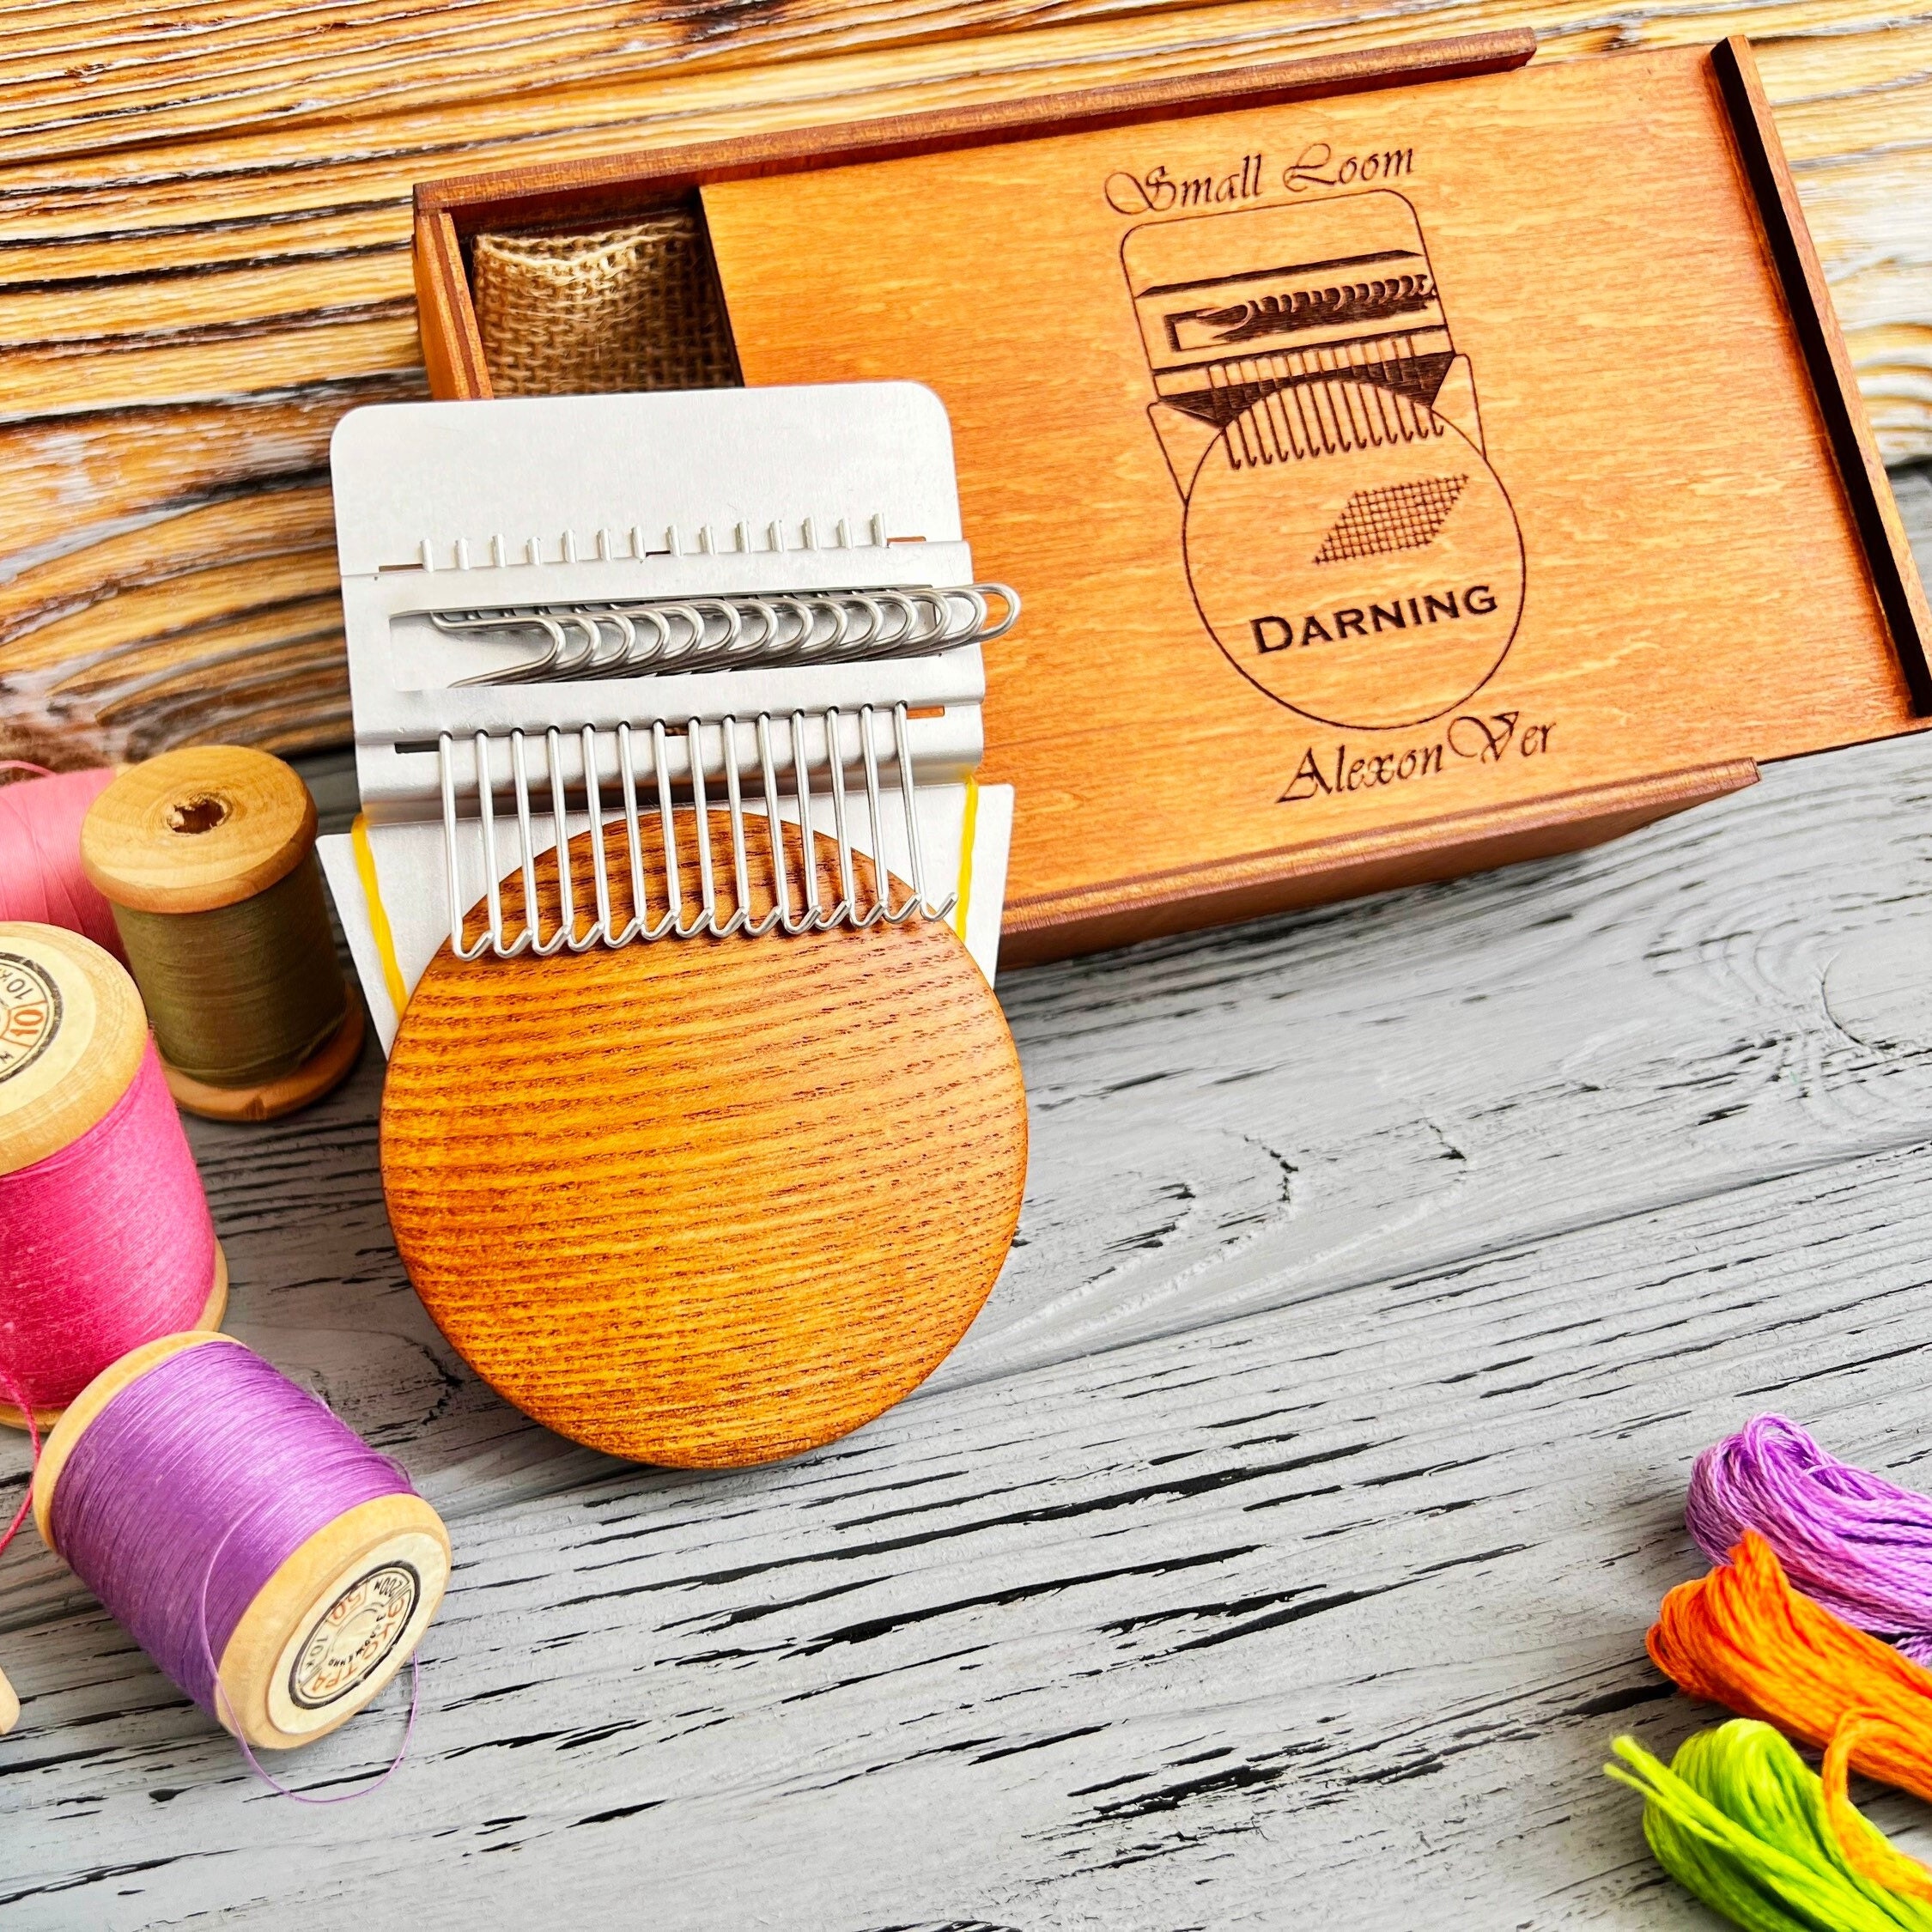 Sock Darning Kit, Darning Supplies Kit Wooden Darning Tool Compact  Lightweight Sewing Kits for Darning Socks Sweaters Pants Hats Scarves